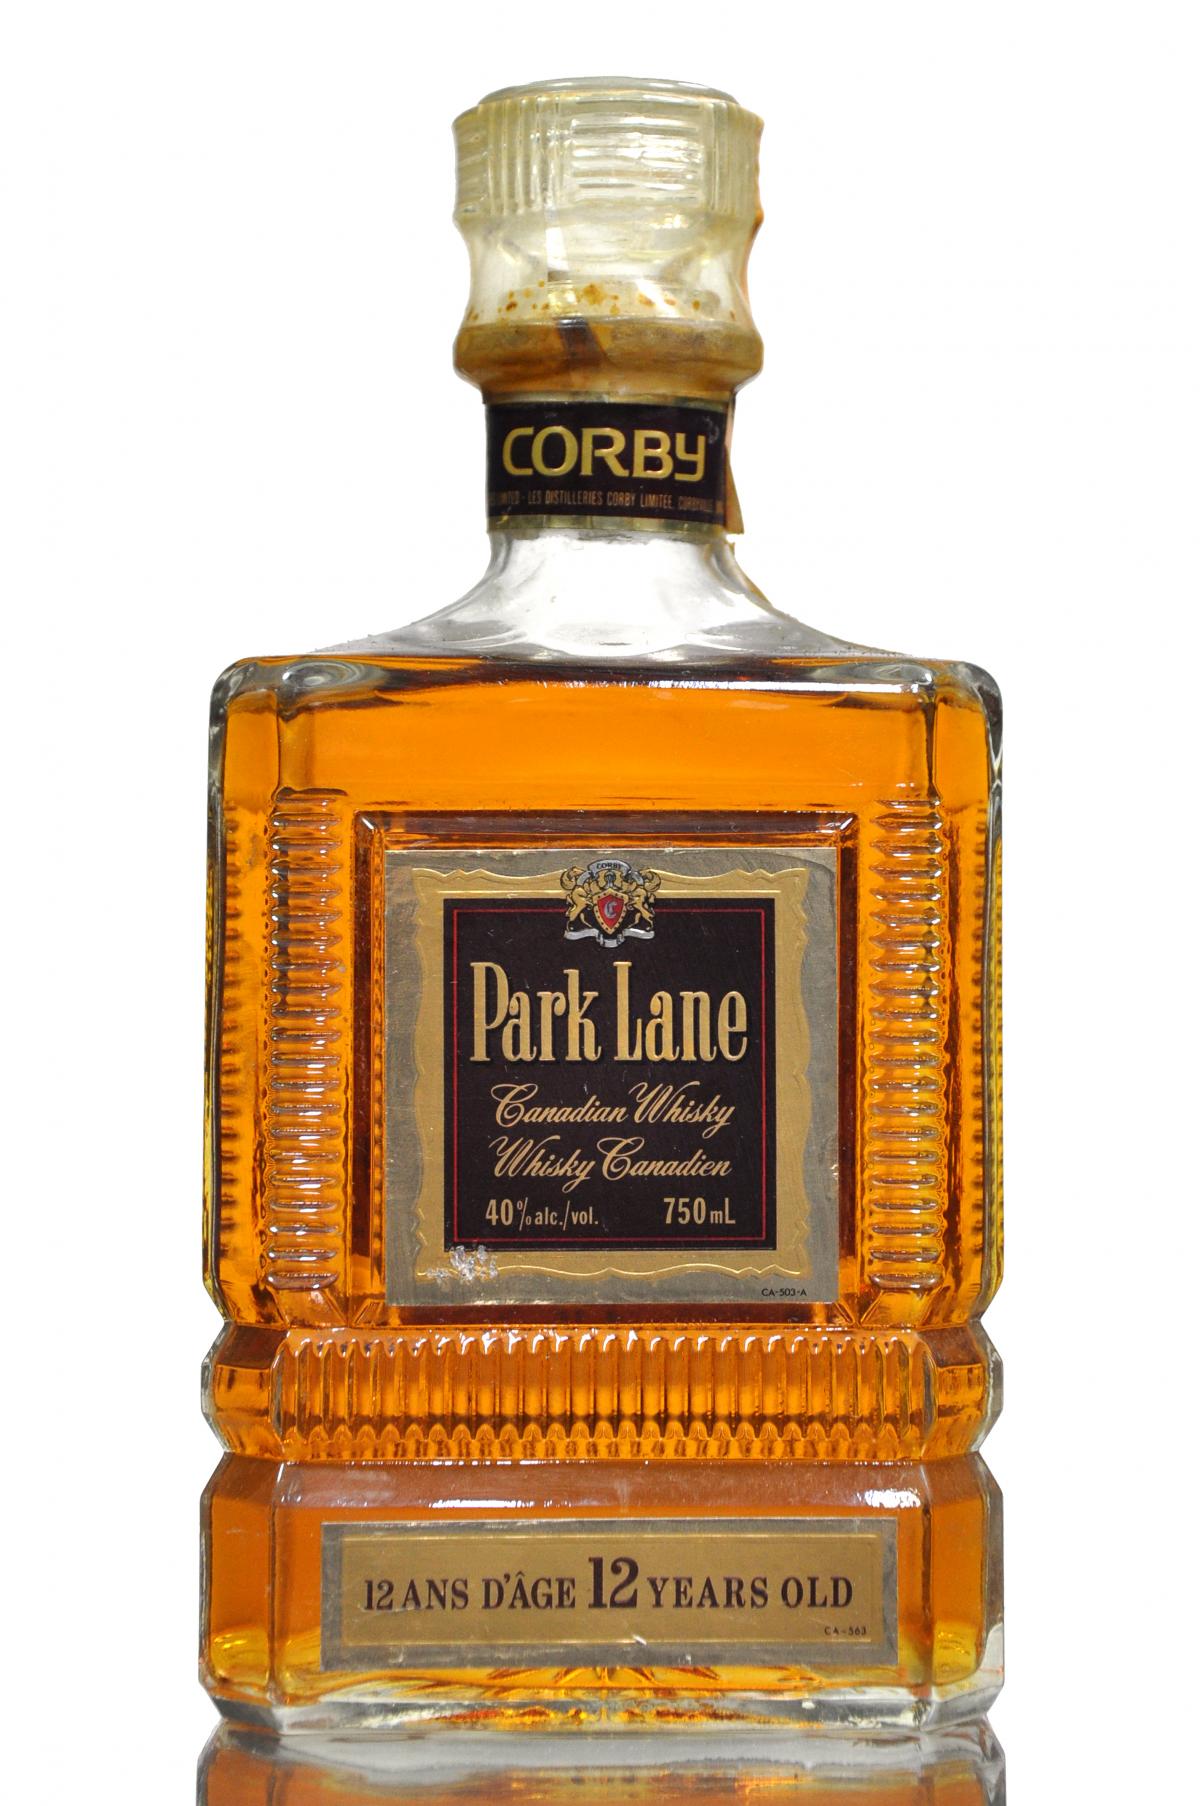 Park Lane 12 Year Old - Canadian Whisky - 1980s